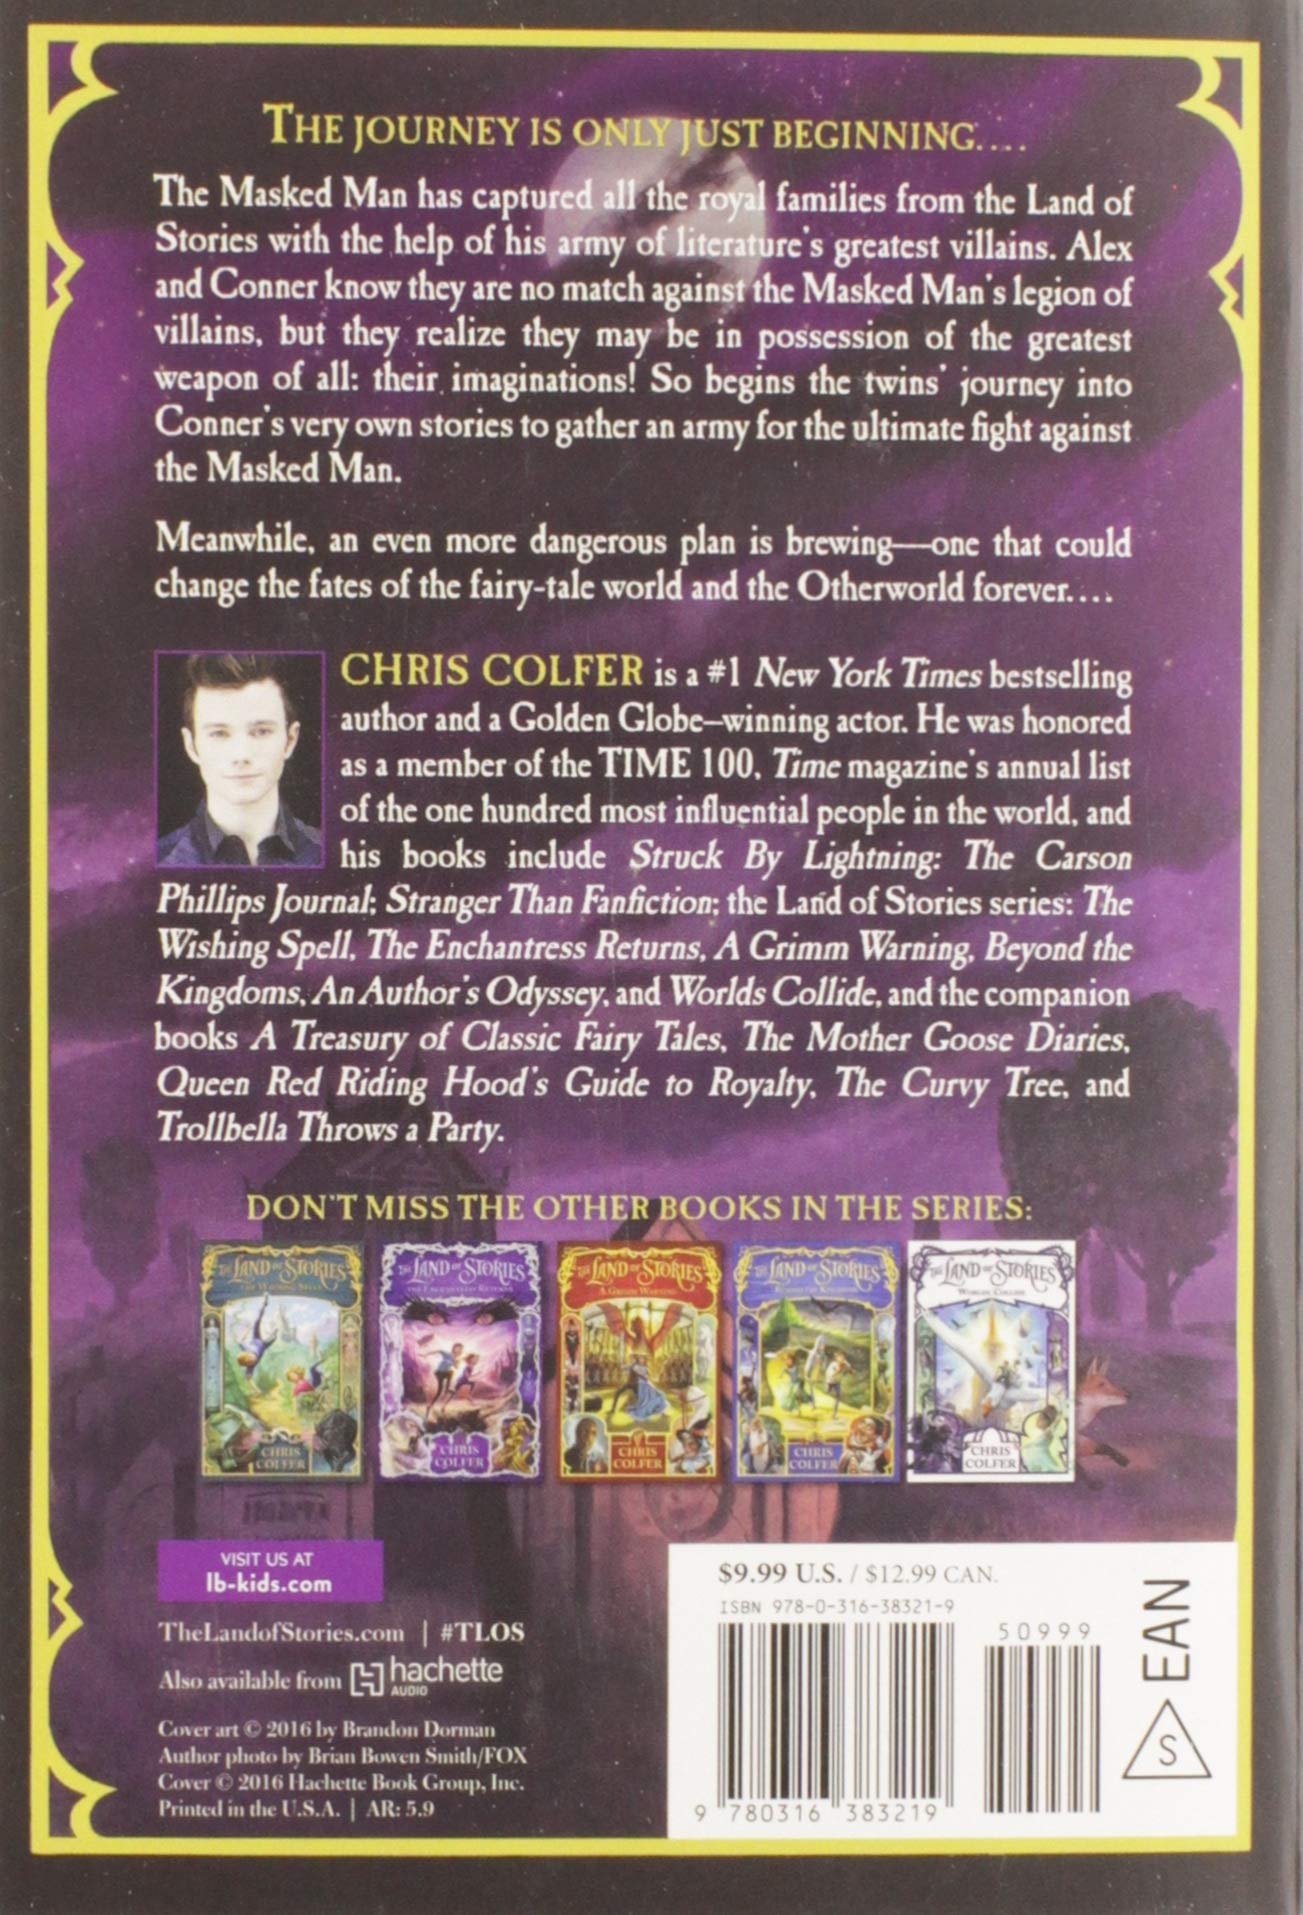 The Land of Stories - An Author’s Odyssey by Chris Colfer (Book 5)